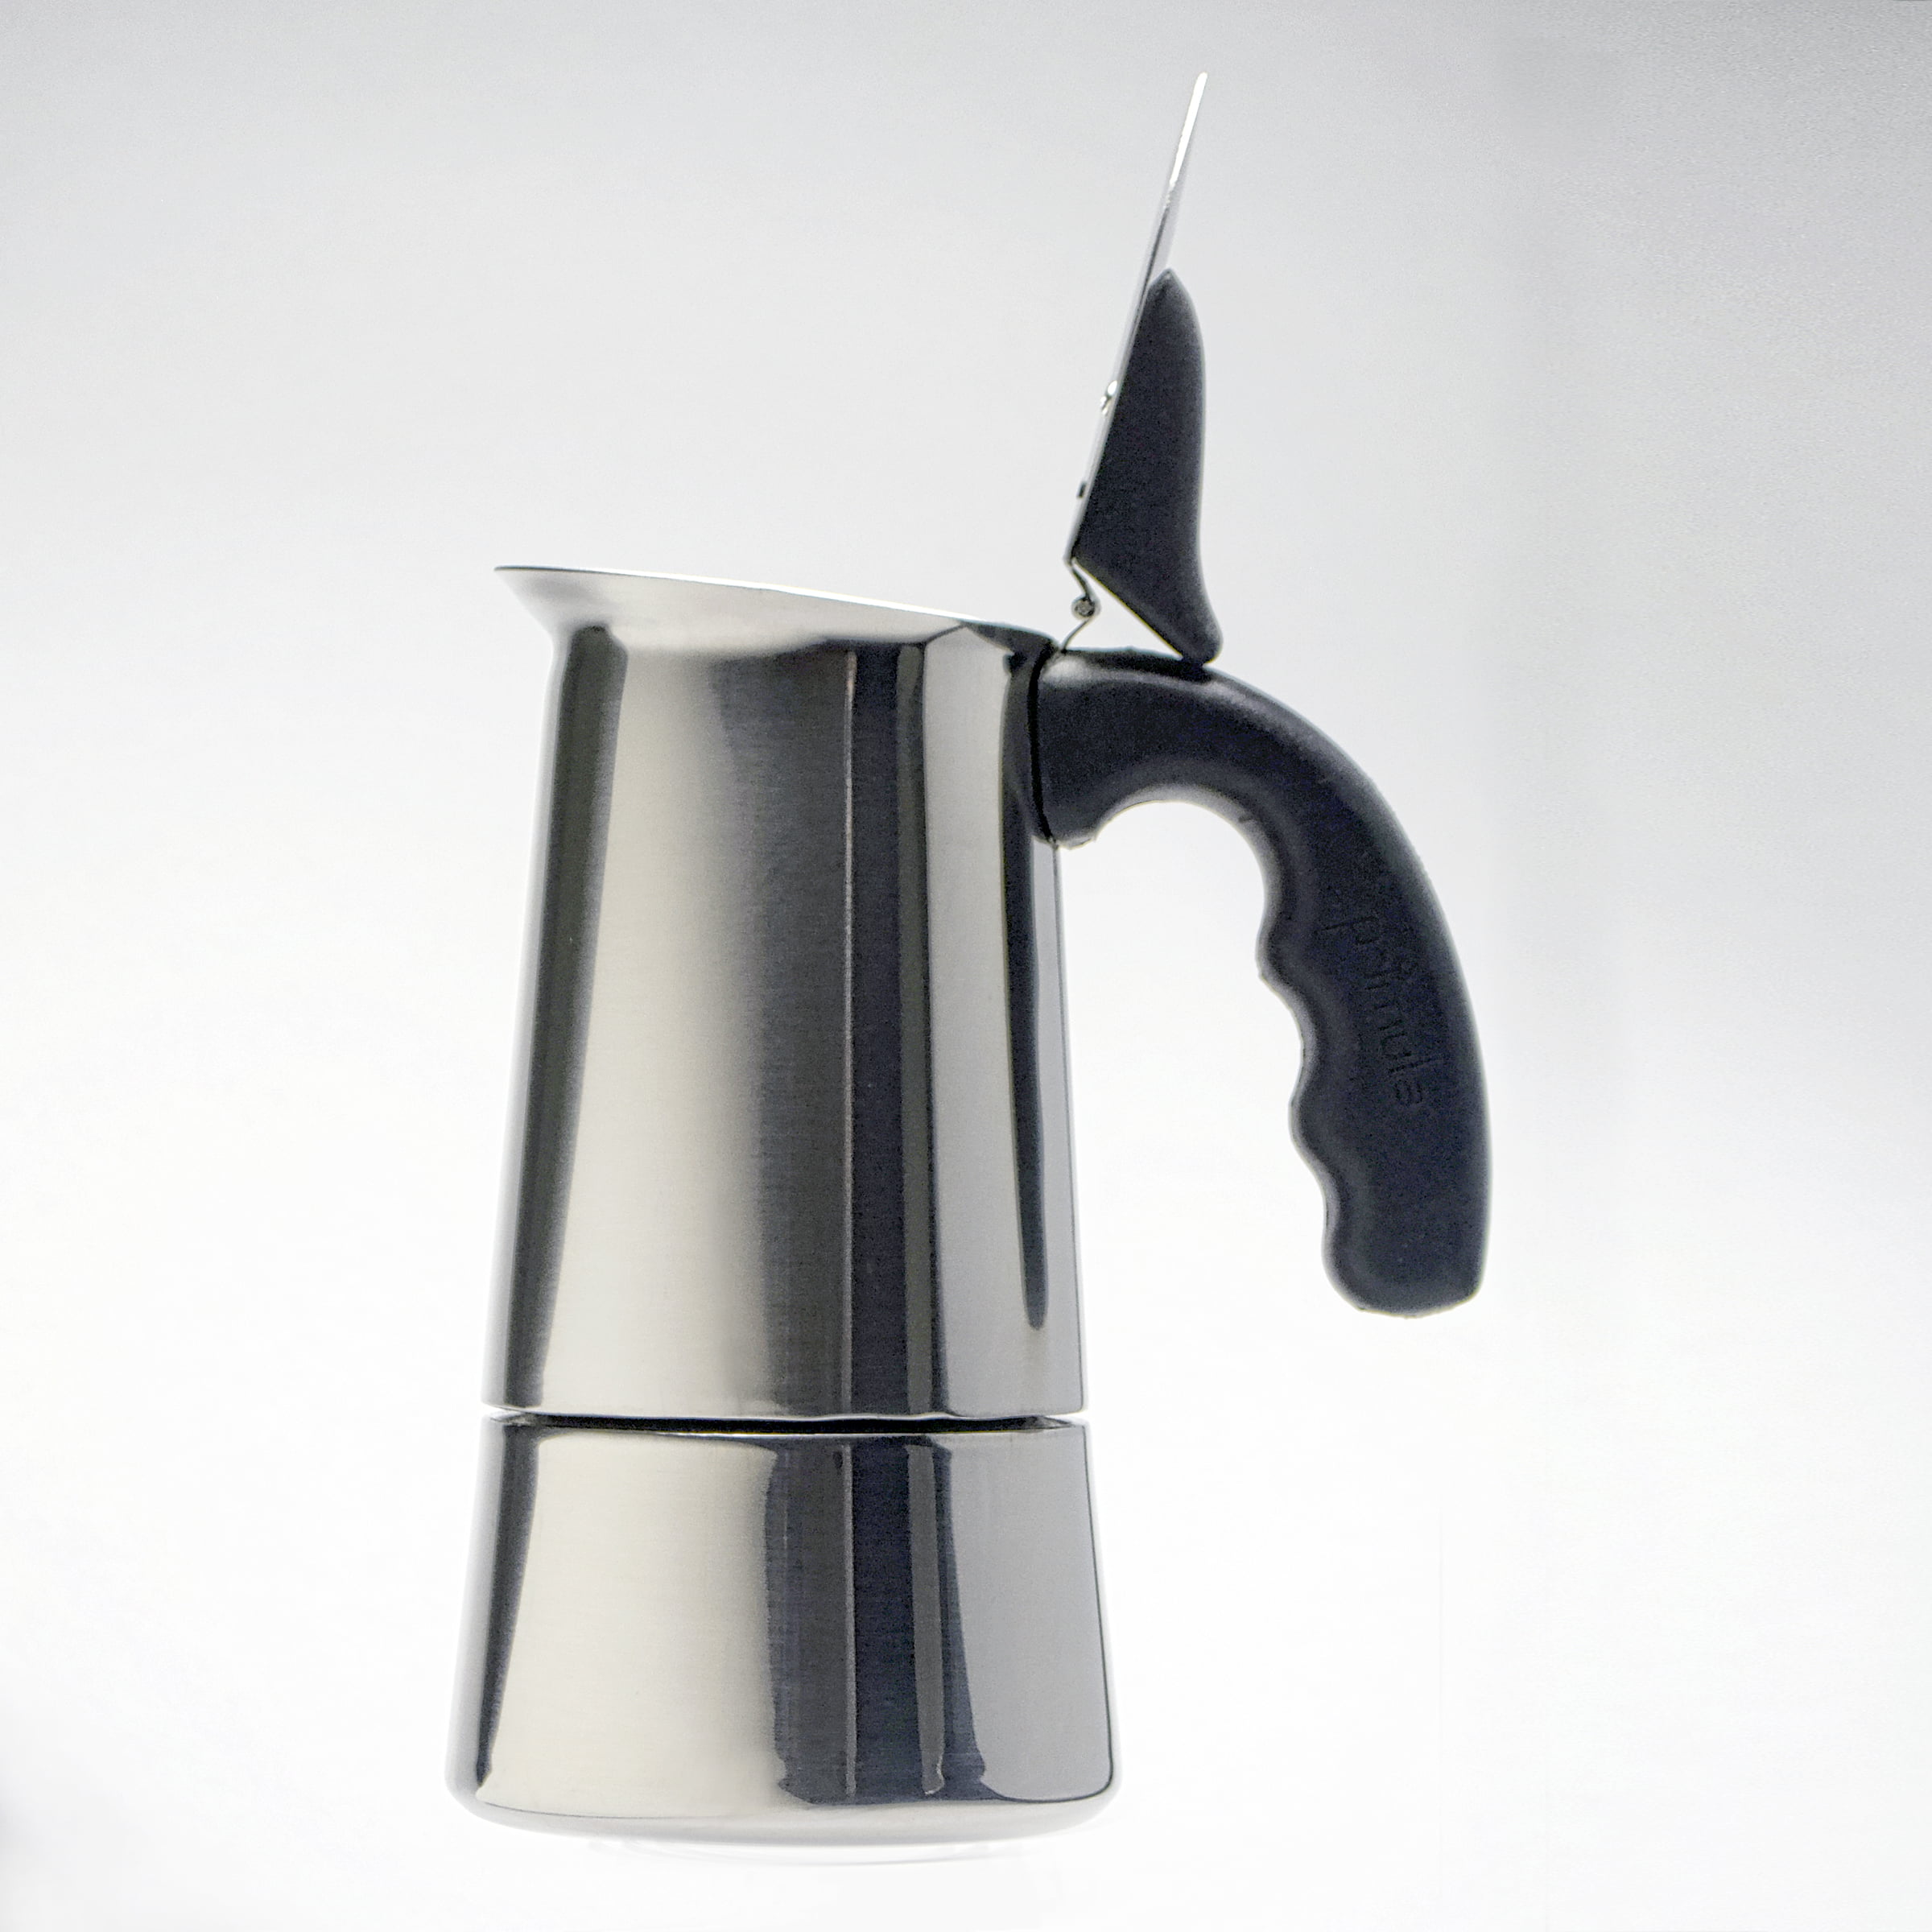  Liineparalle Stovetop Coffee Maker, Stainless Steel